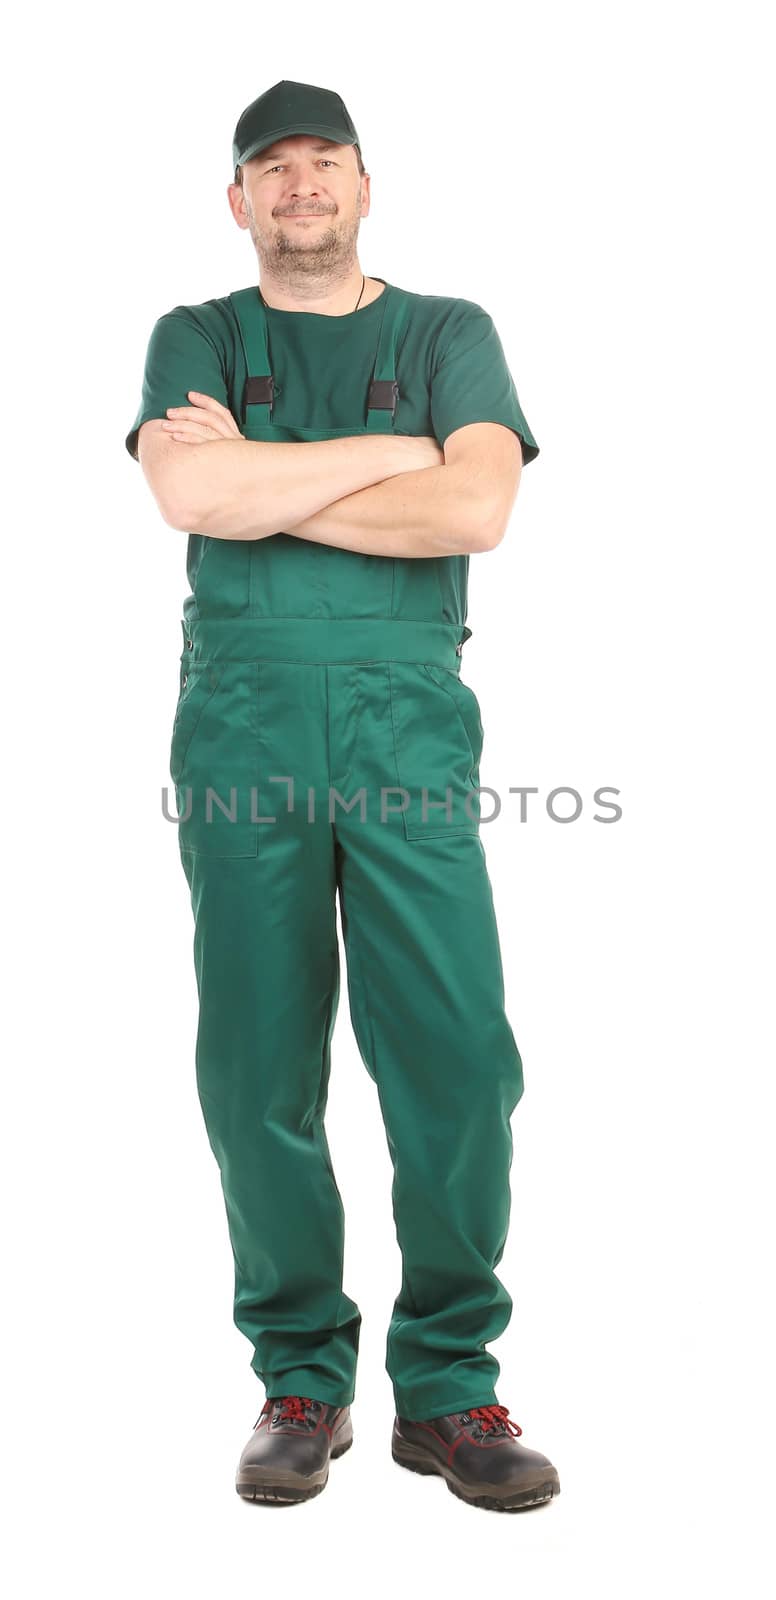 Man in green uniform. Isolated on a white background.